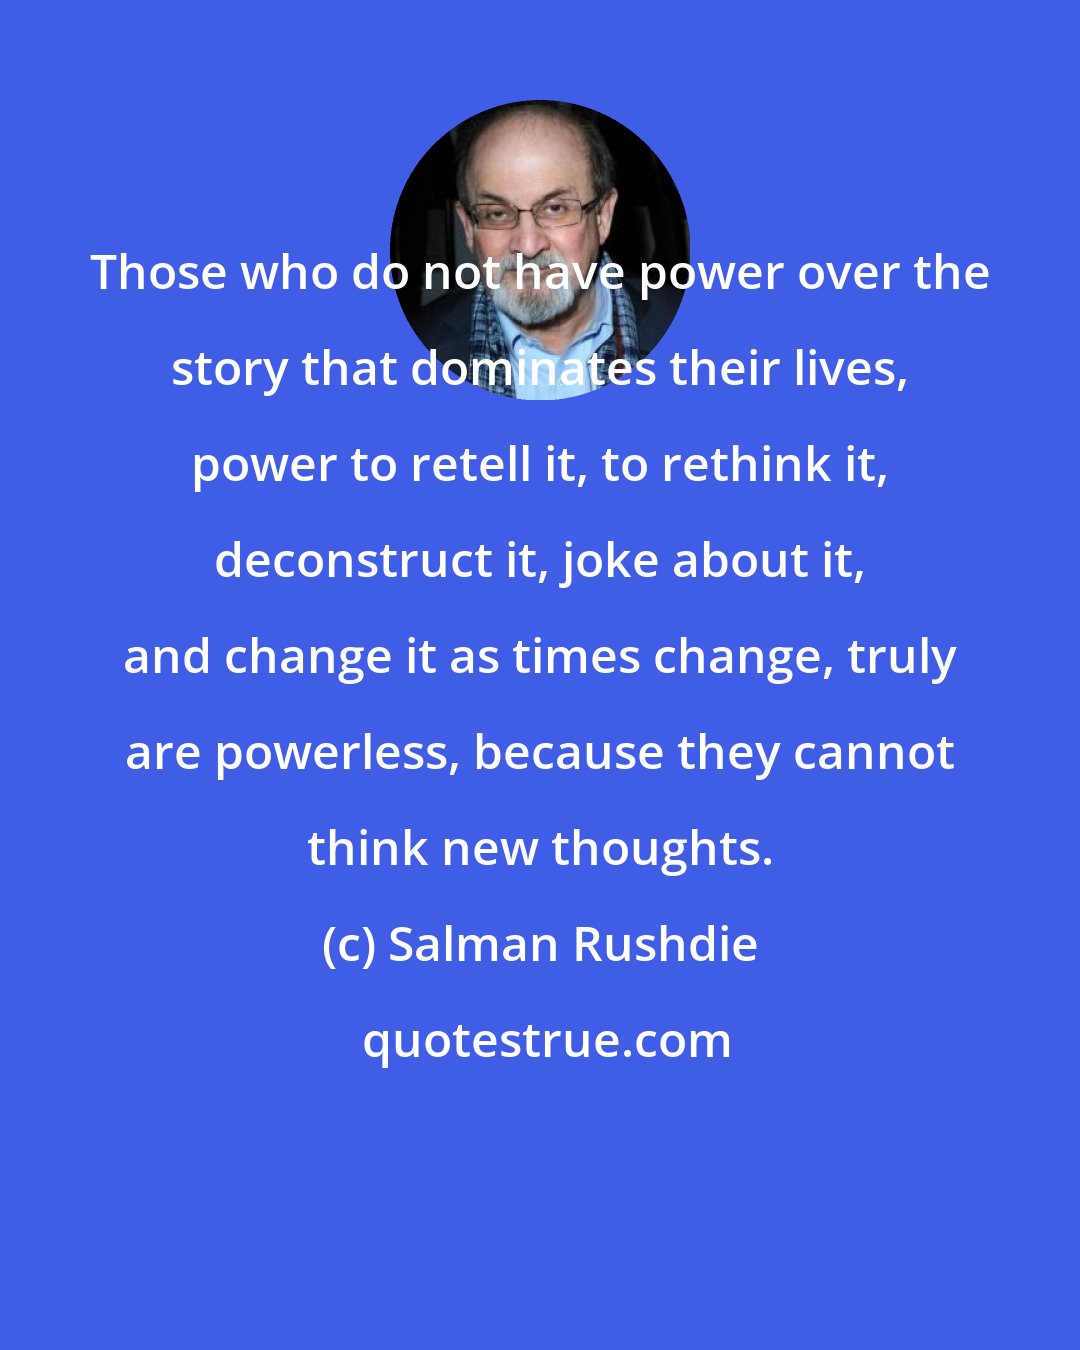 Salman Rushdie: Those who do not have power over the story that dominates their lives, power to retell it, to rethink it, deconstruct it, joke about it, and change it as times change, truly are powerless, because they cannot think new thoughts.